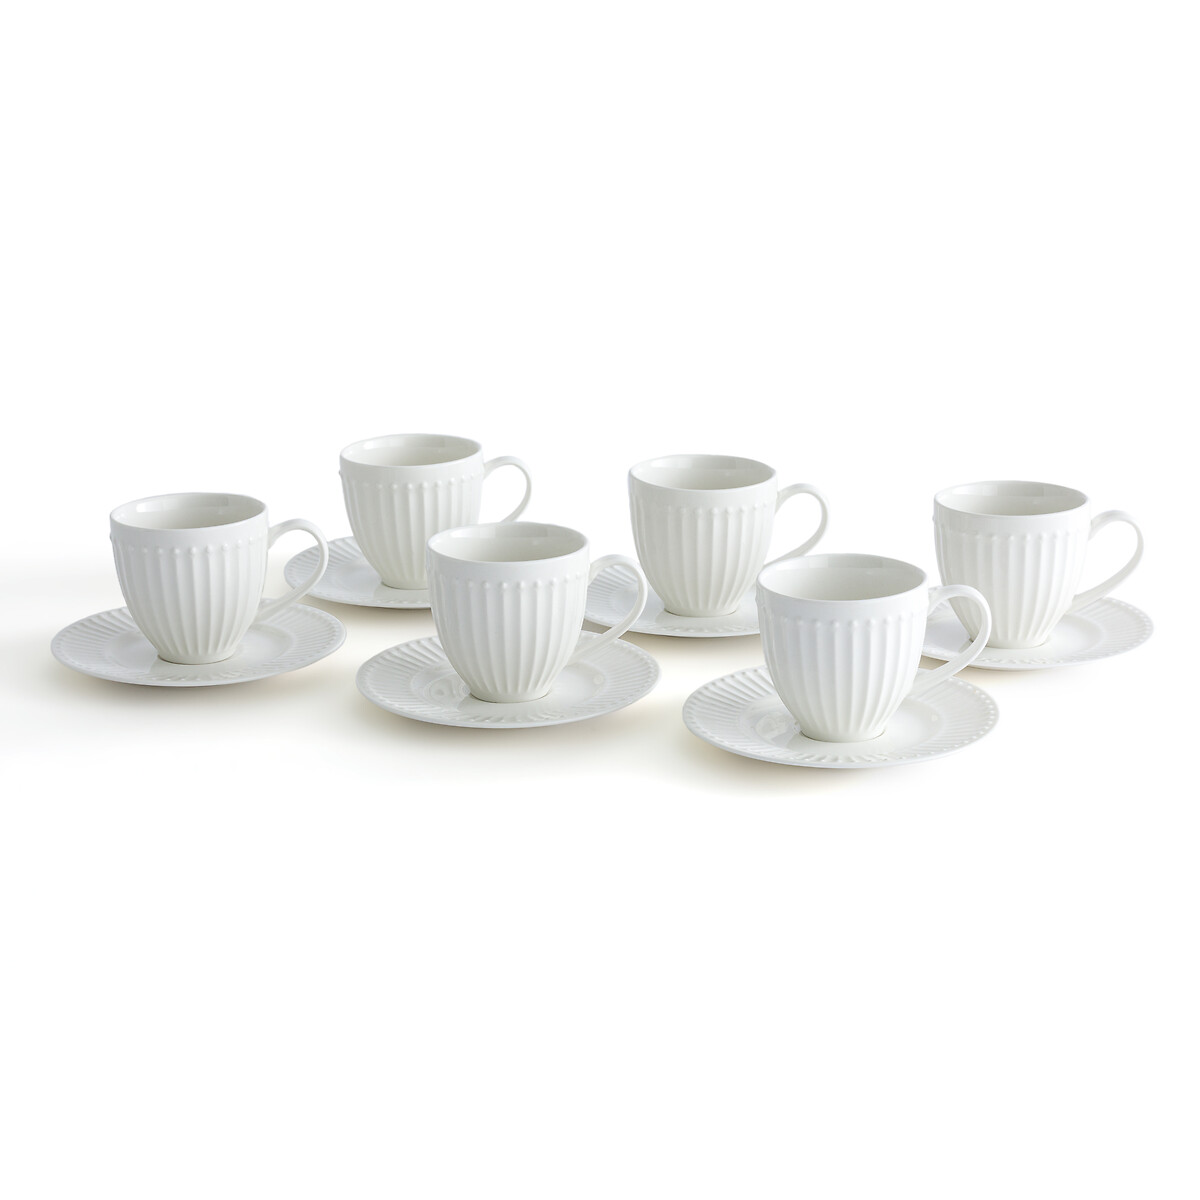 Set of 6 jewely porcelain tea cups and saucers white La Redoute ...